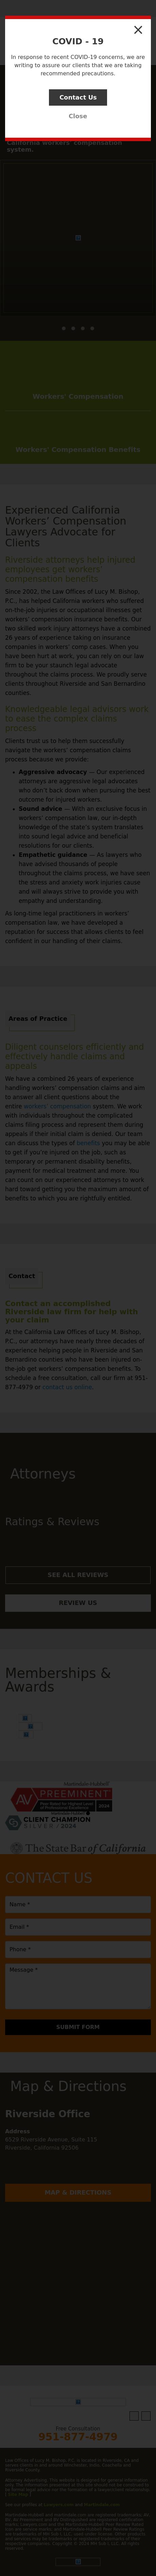 Law Office of Lucy M Bishop - Riverside CA Lawyers